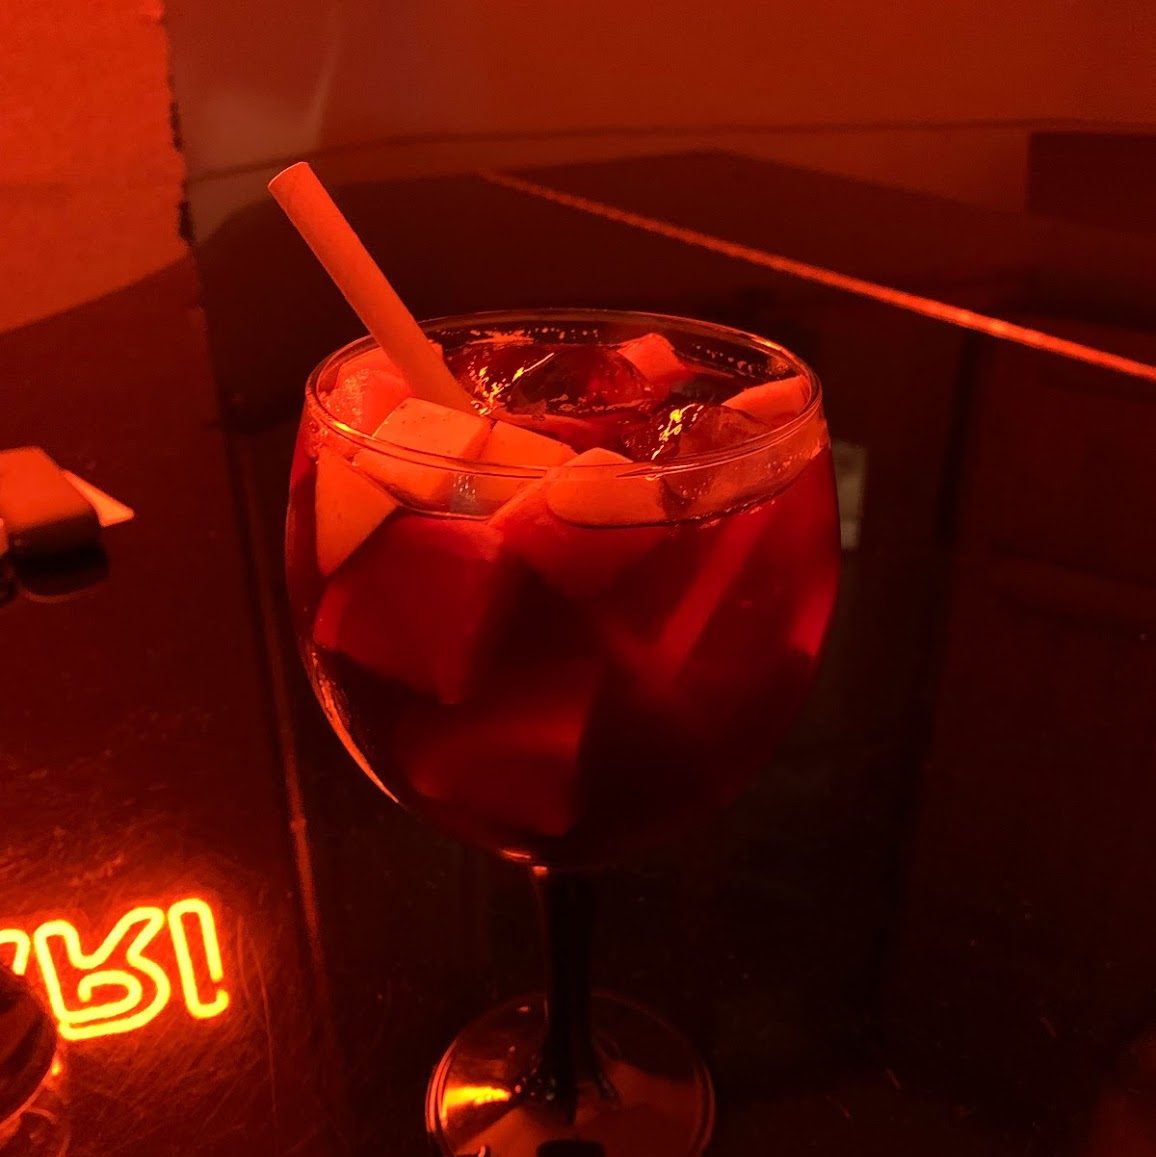 A glass of sangria sitting on a table in a dark room with red lighting